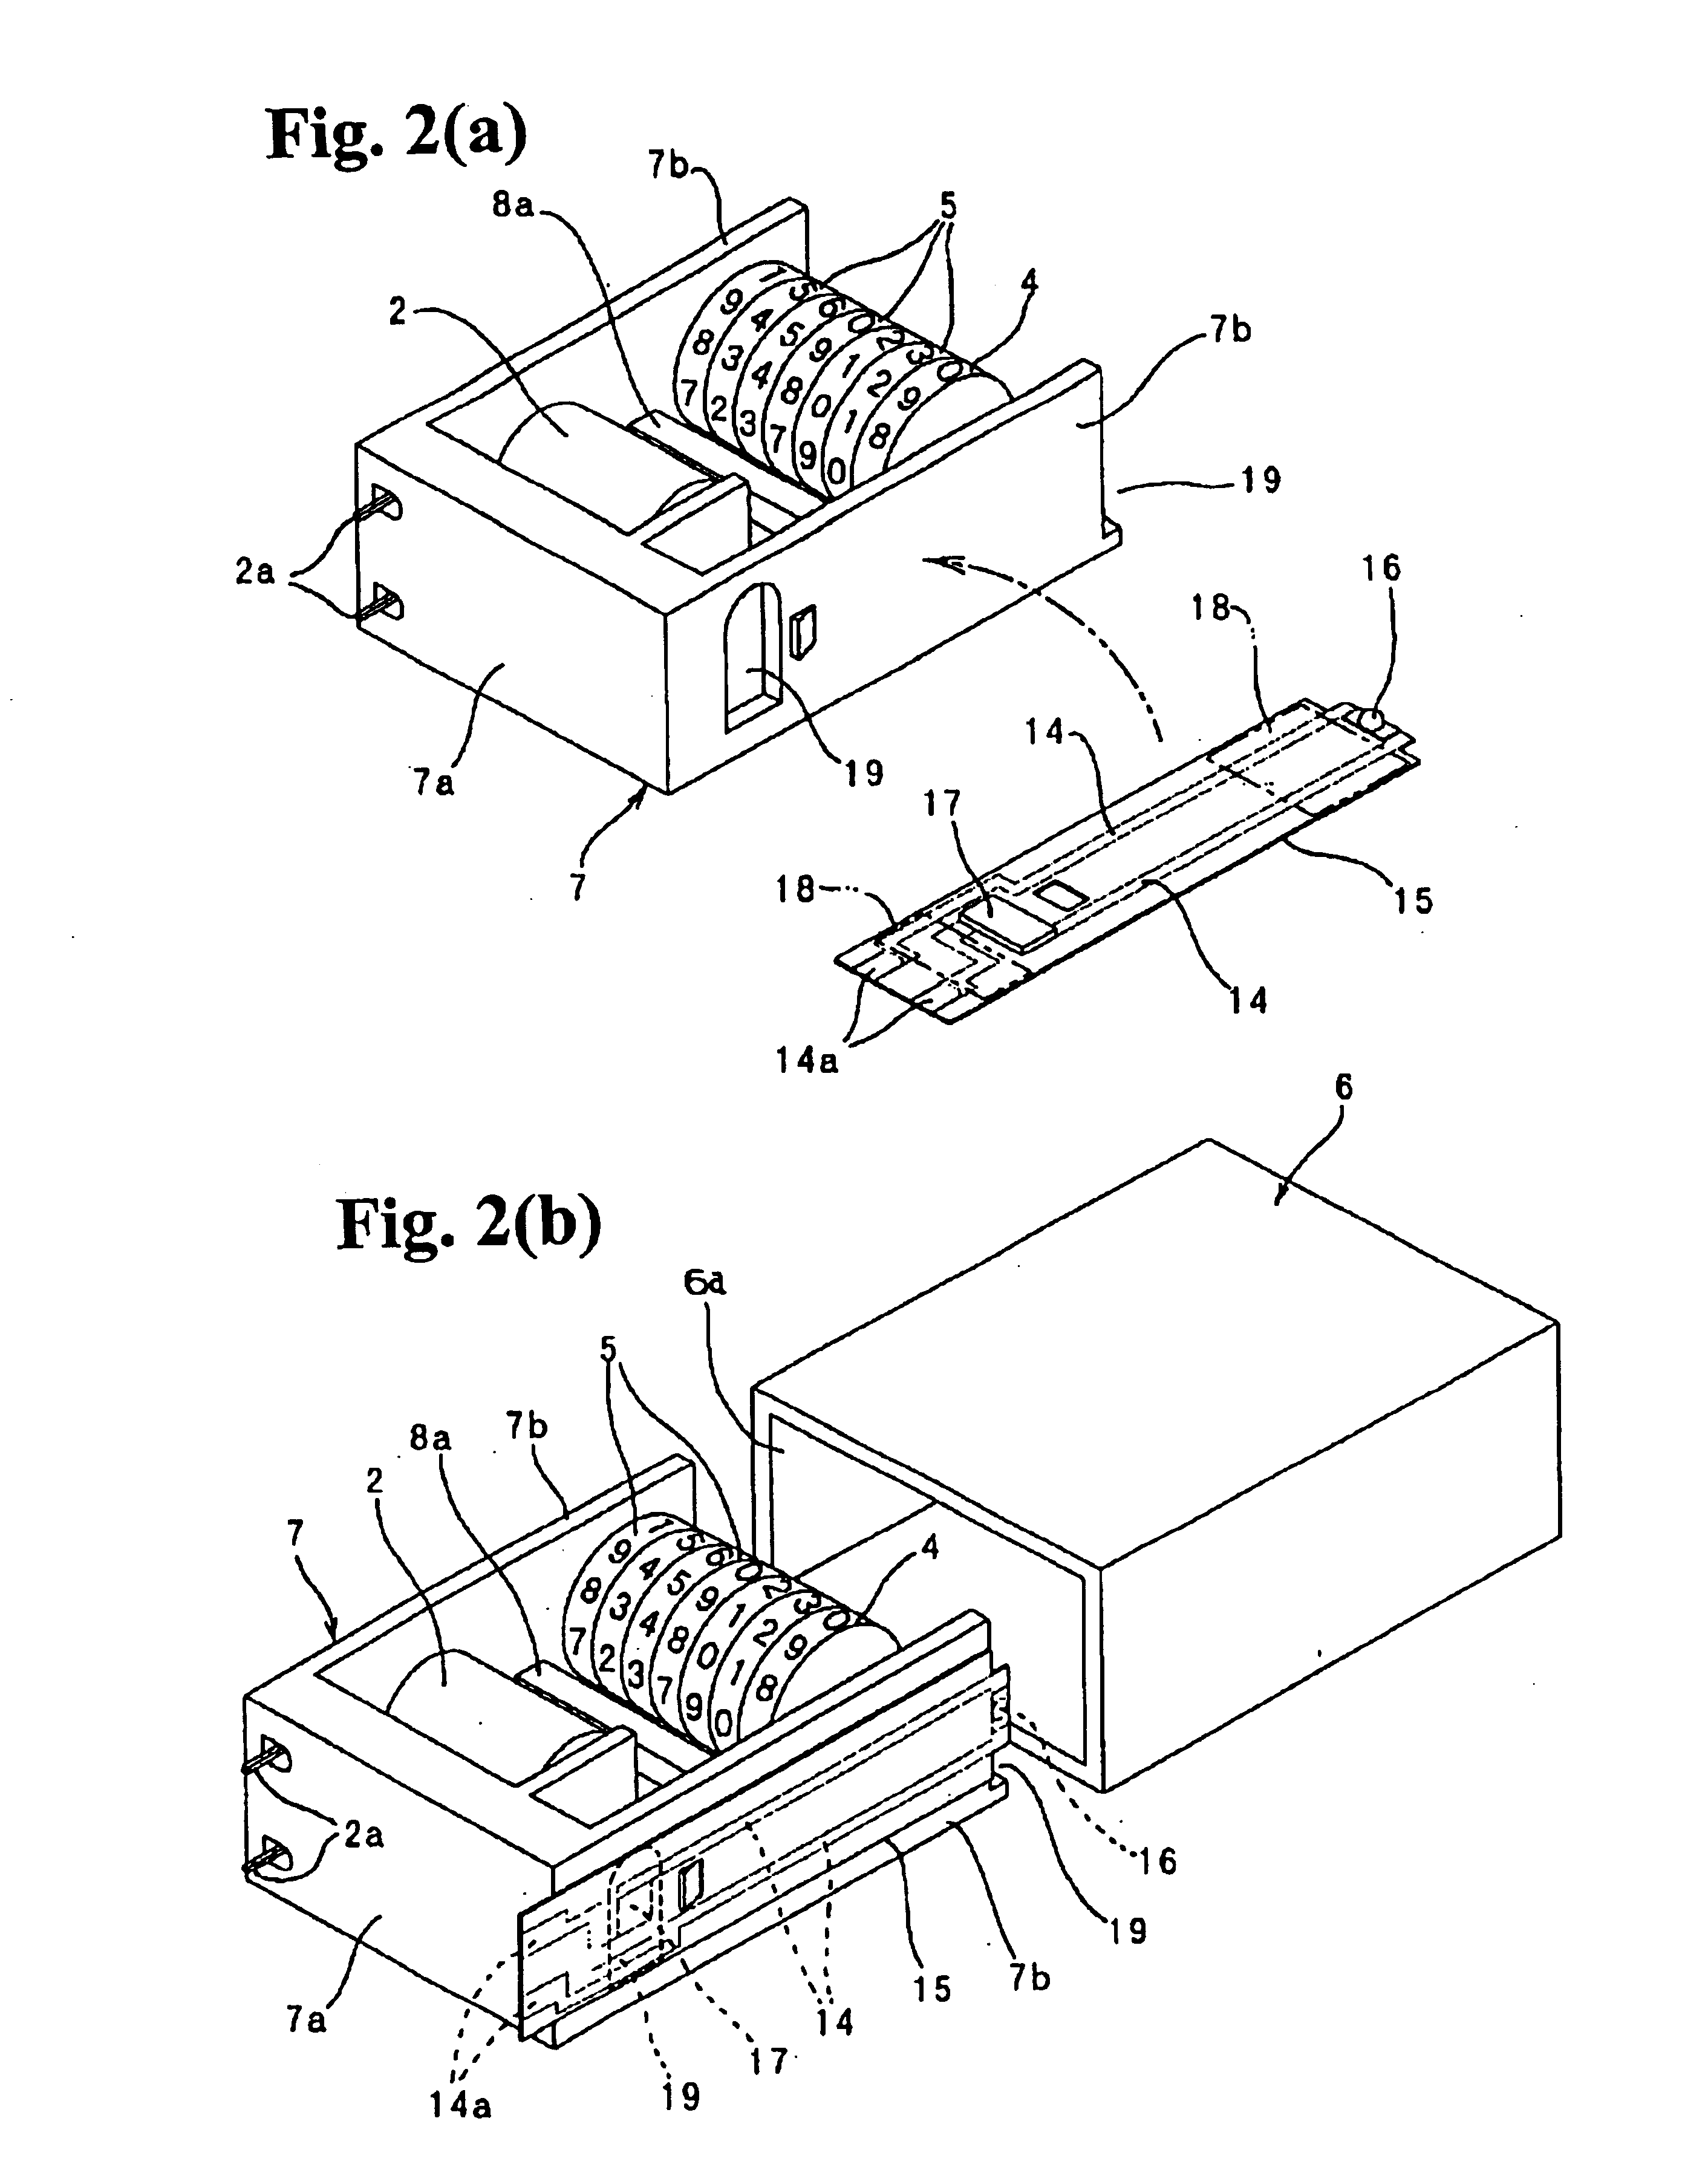 Electromagnetic counter with built-in illumination device